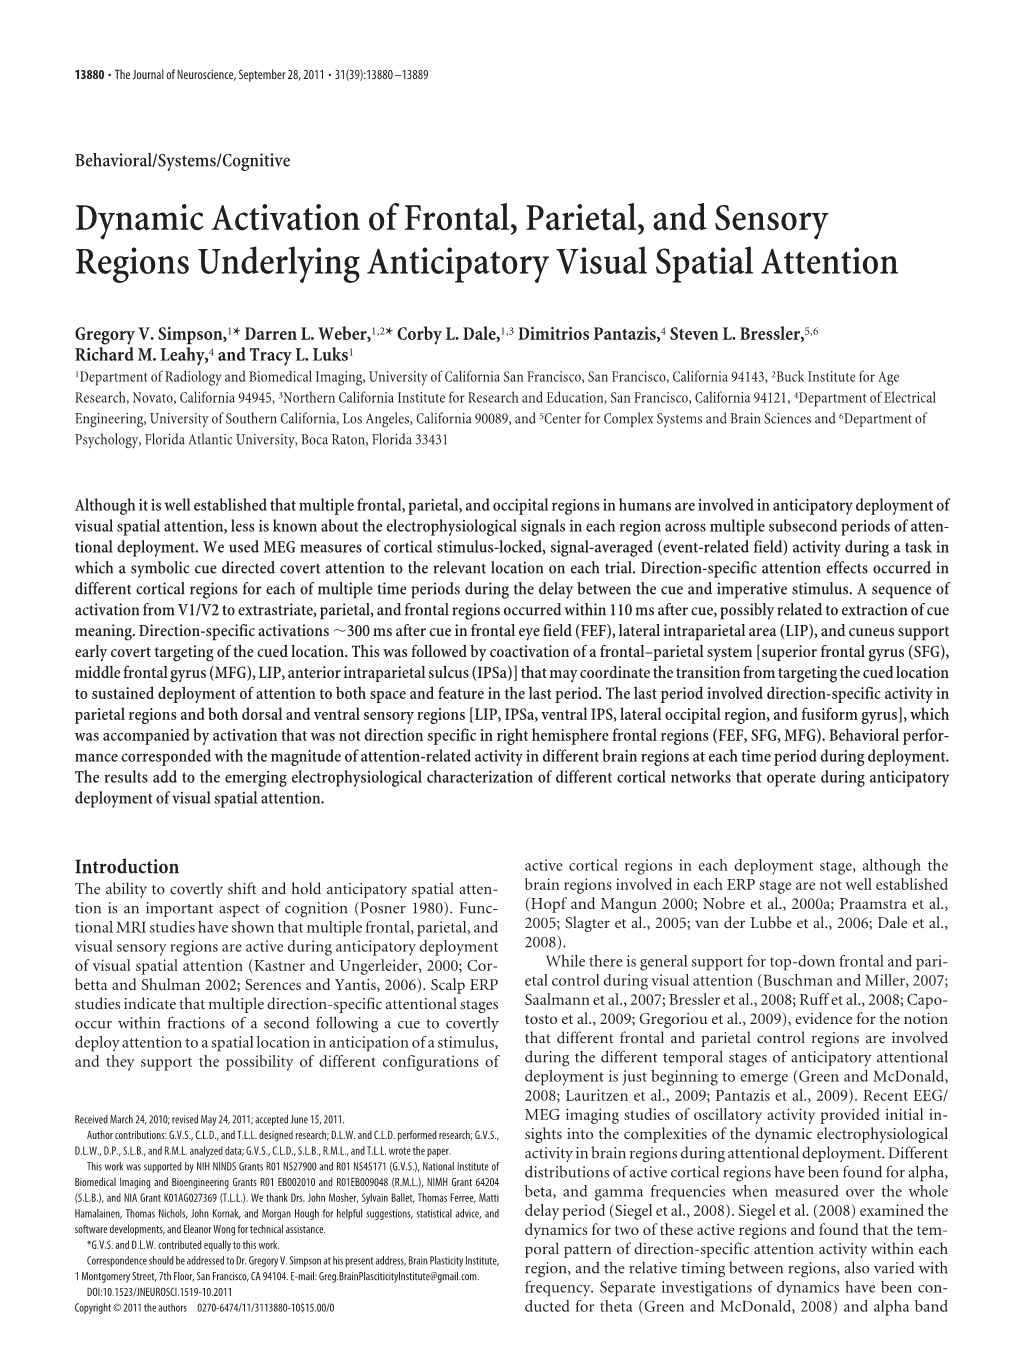 Dynamic Activation of Frontal, Parietal, and Sensory Regions Underlying Anticipatory Visual Spatial Attention